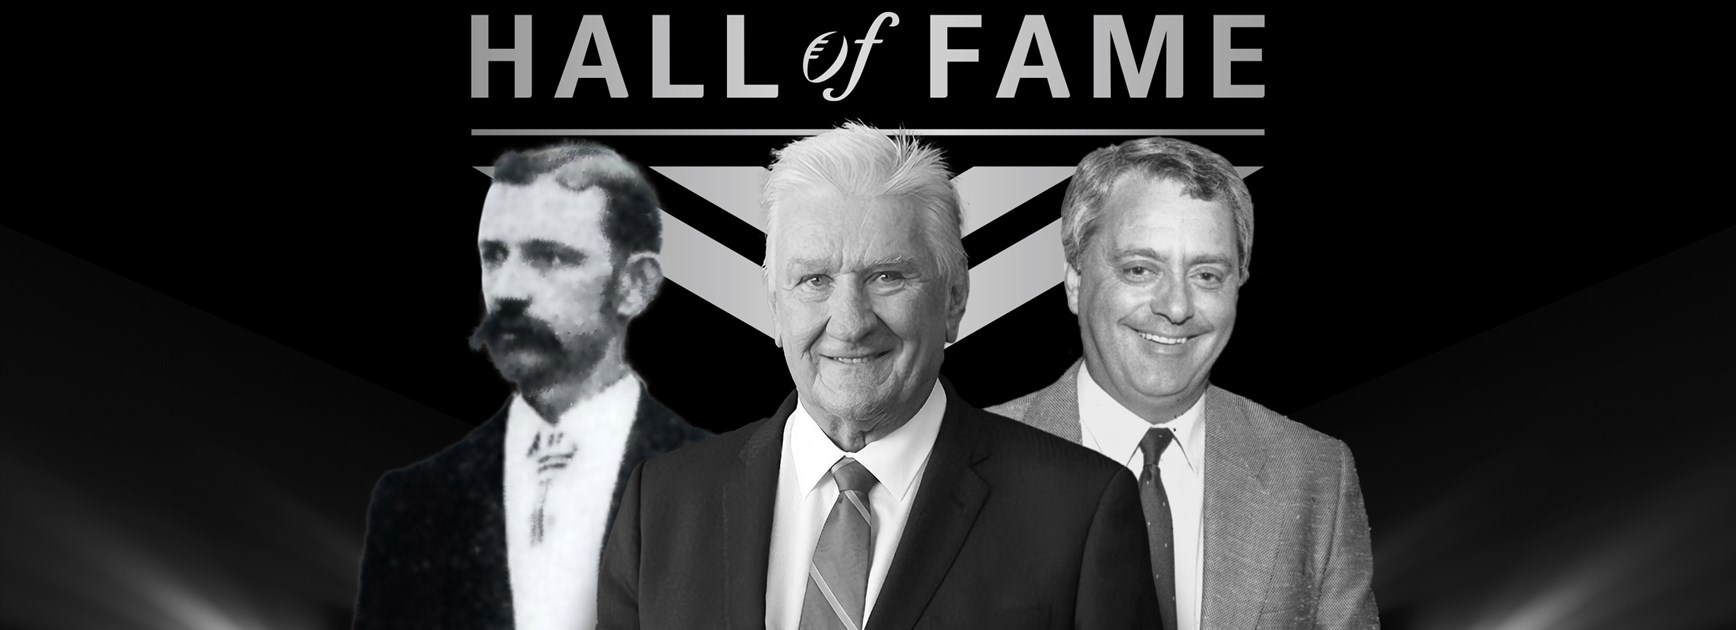 History made with three contributors added to Hall of Fame